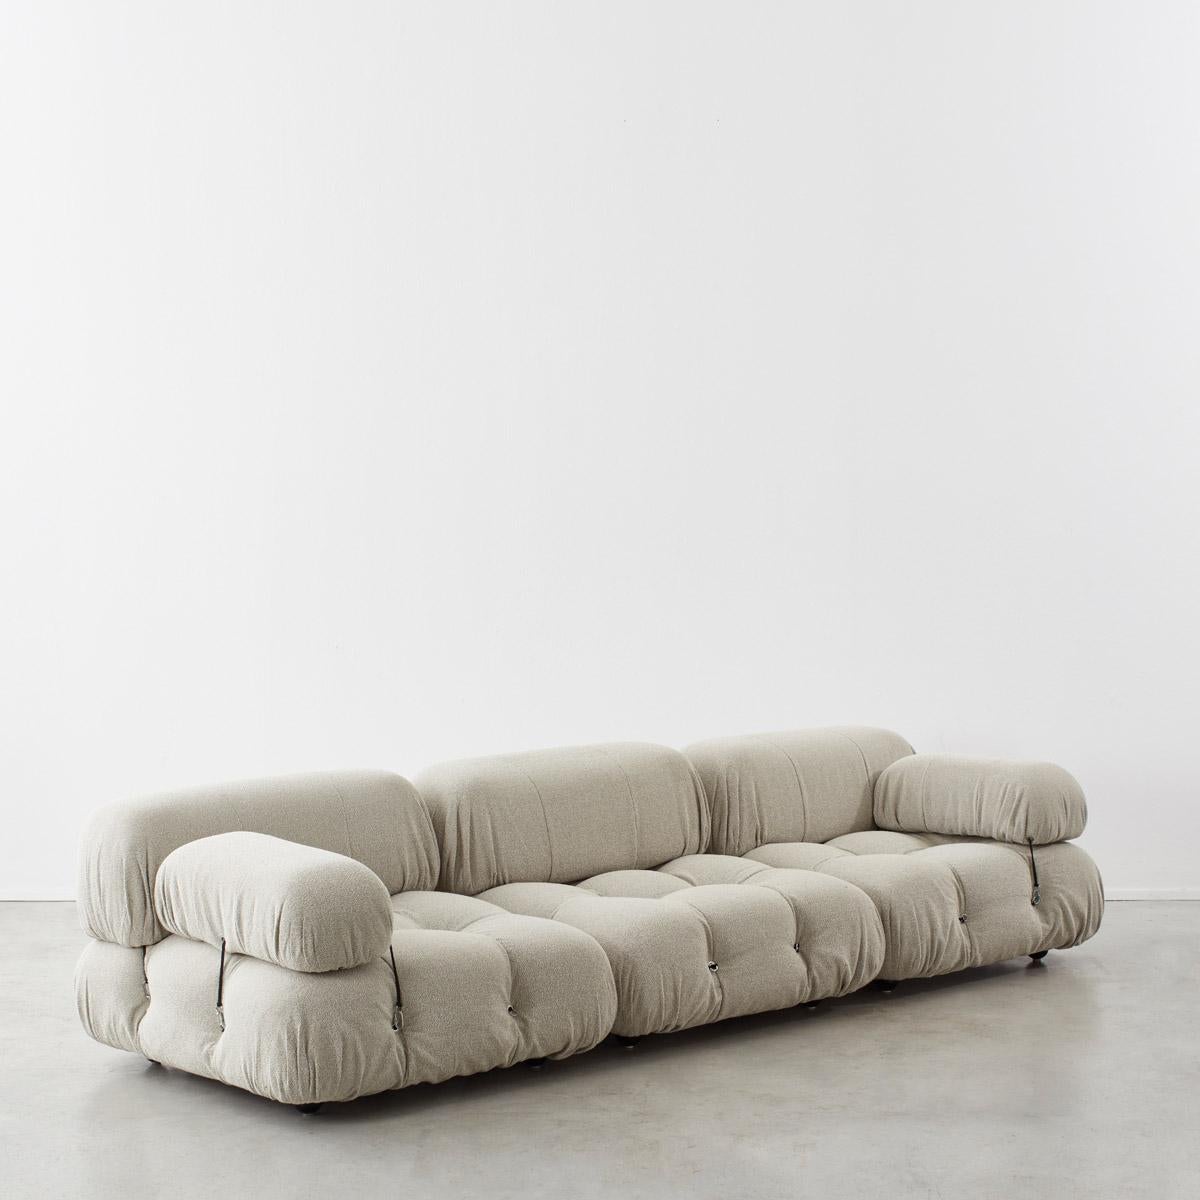 This modular sofa was designed by Mario Bellini in 1971 and was manufactured by C&B Italia. The backs and armrests are provided with rings and carabineers, which allows the user to create the desired configuration best suited to their needs. The